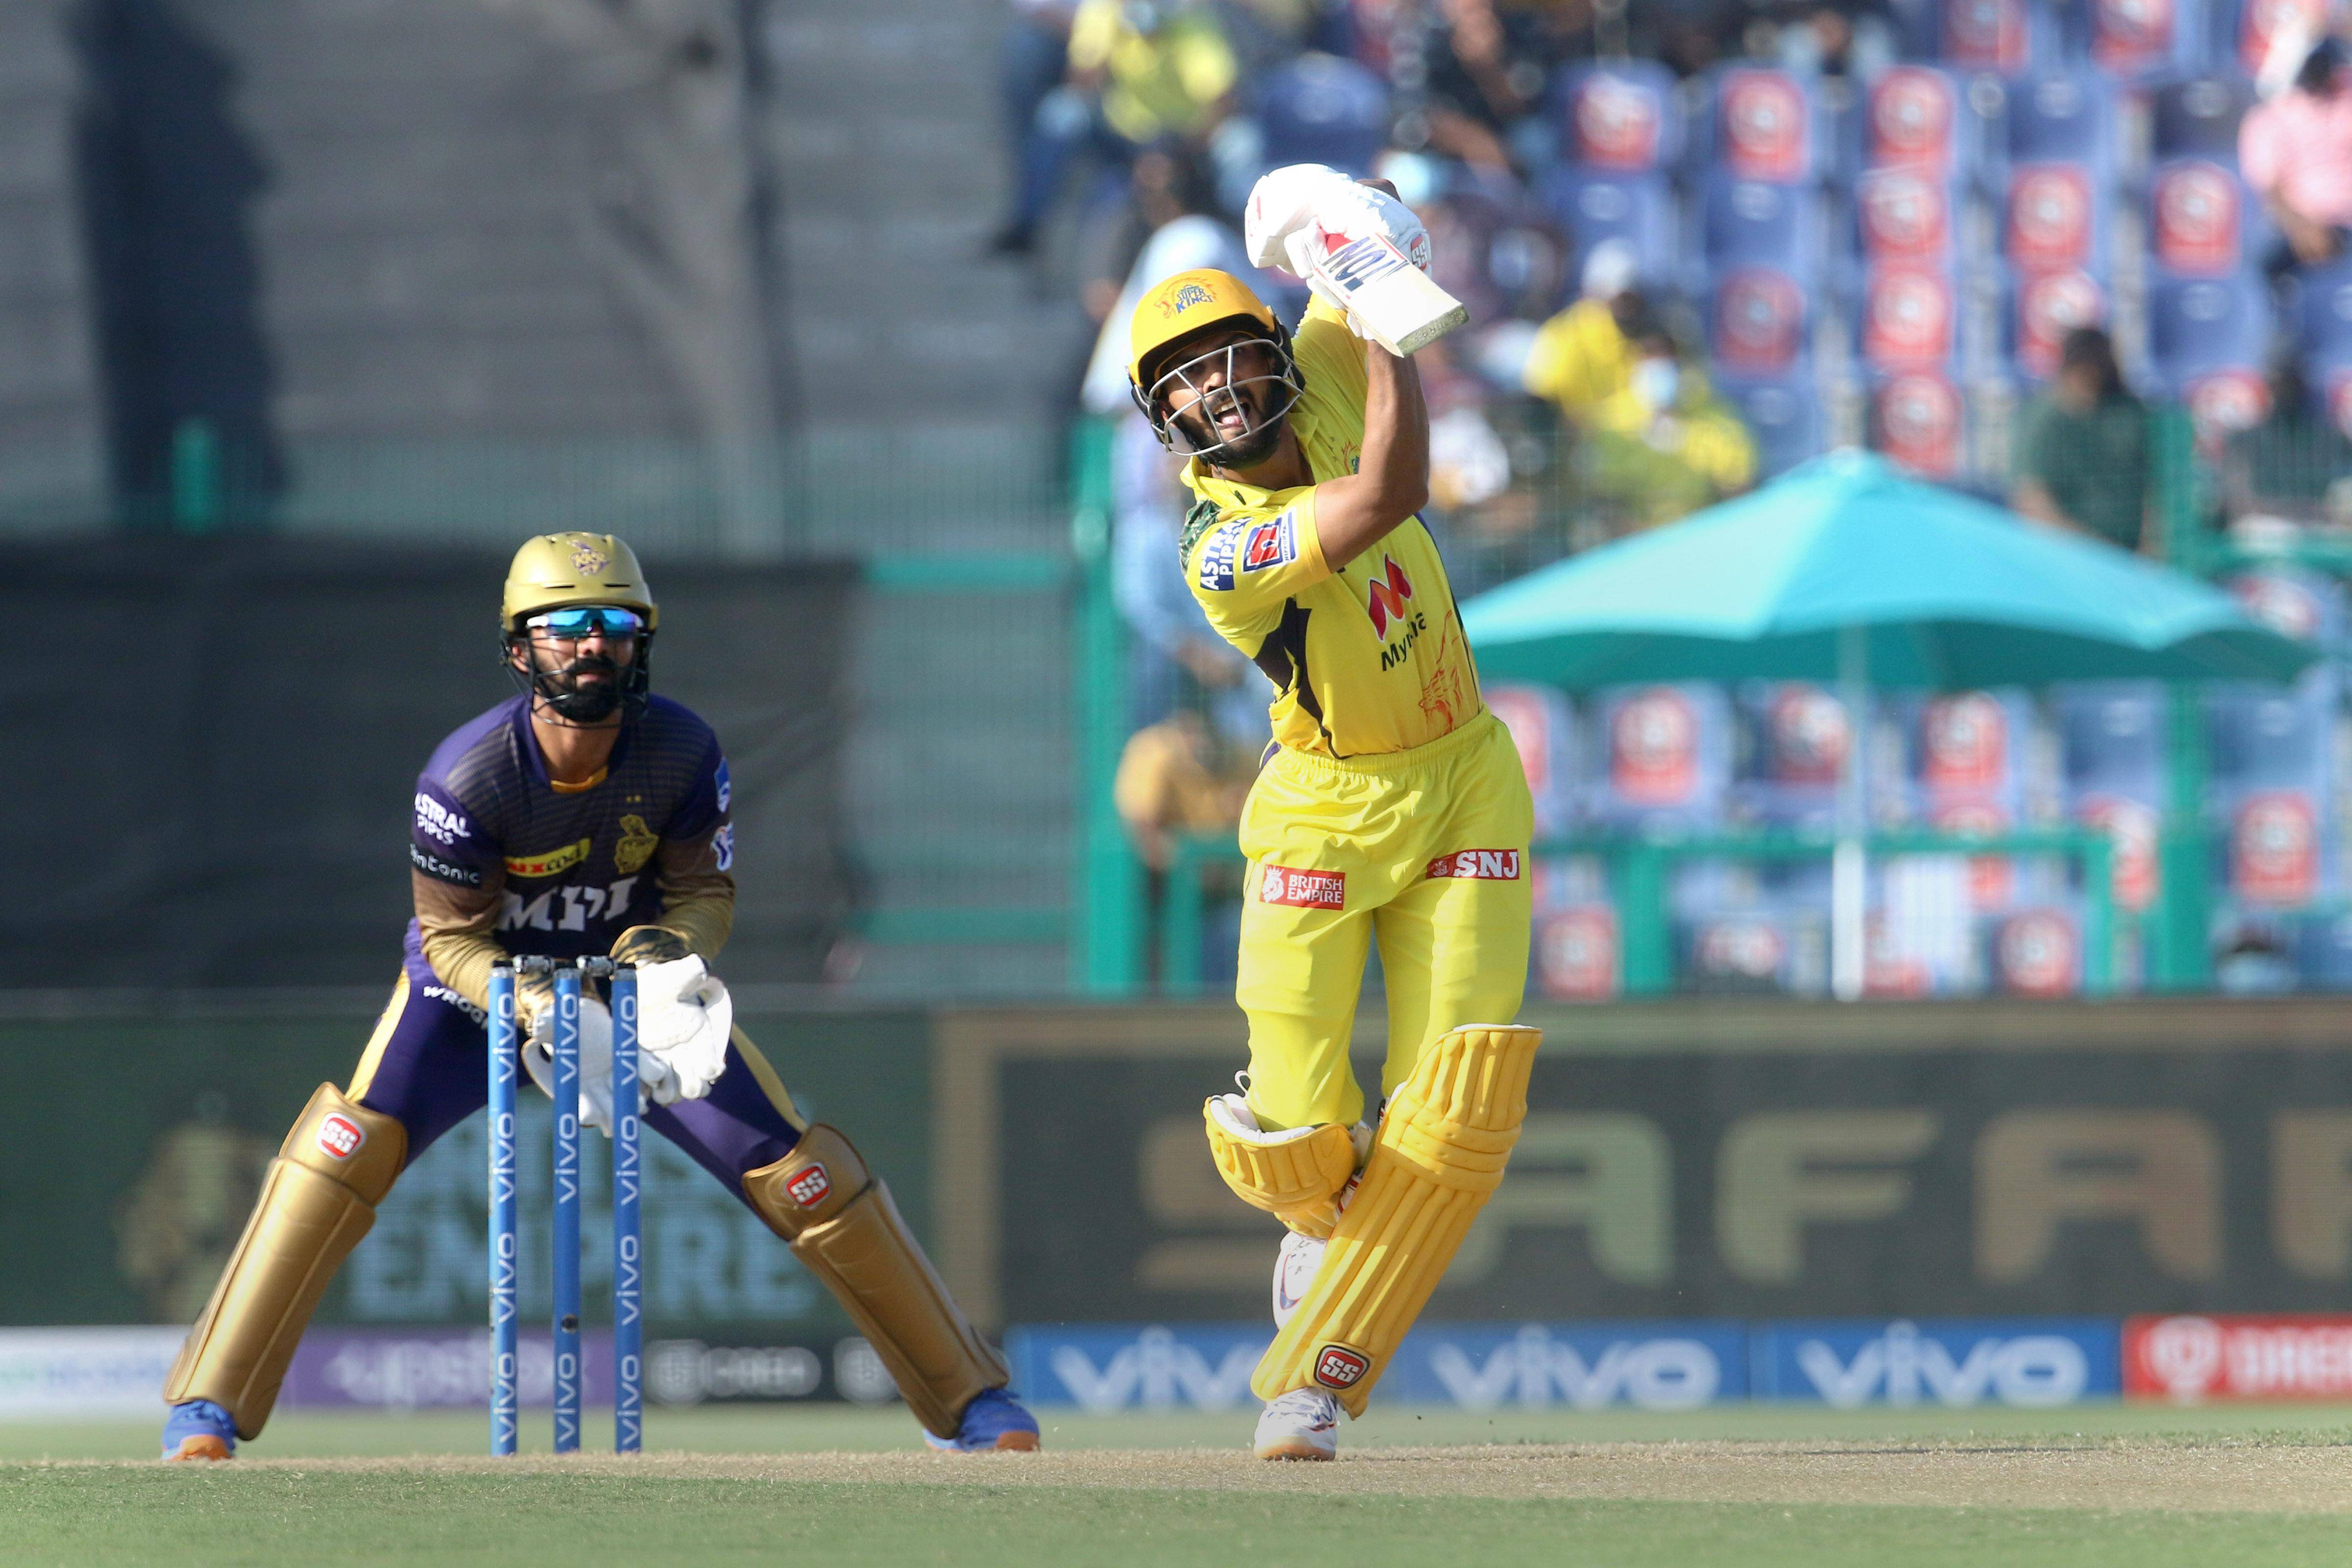 IPL 2021: Chennai Super Kings look to seal spot in top two